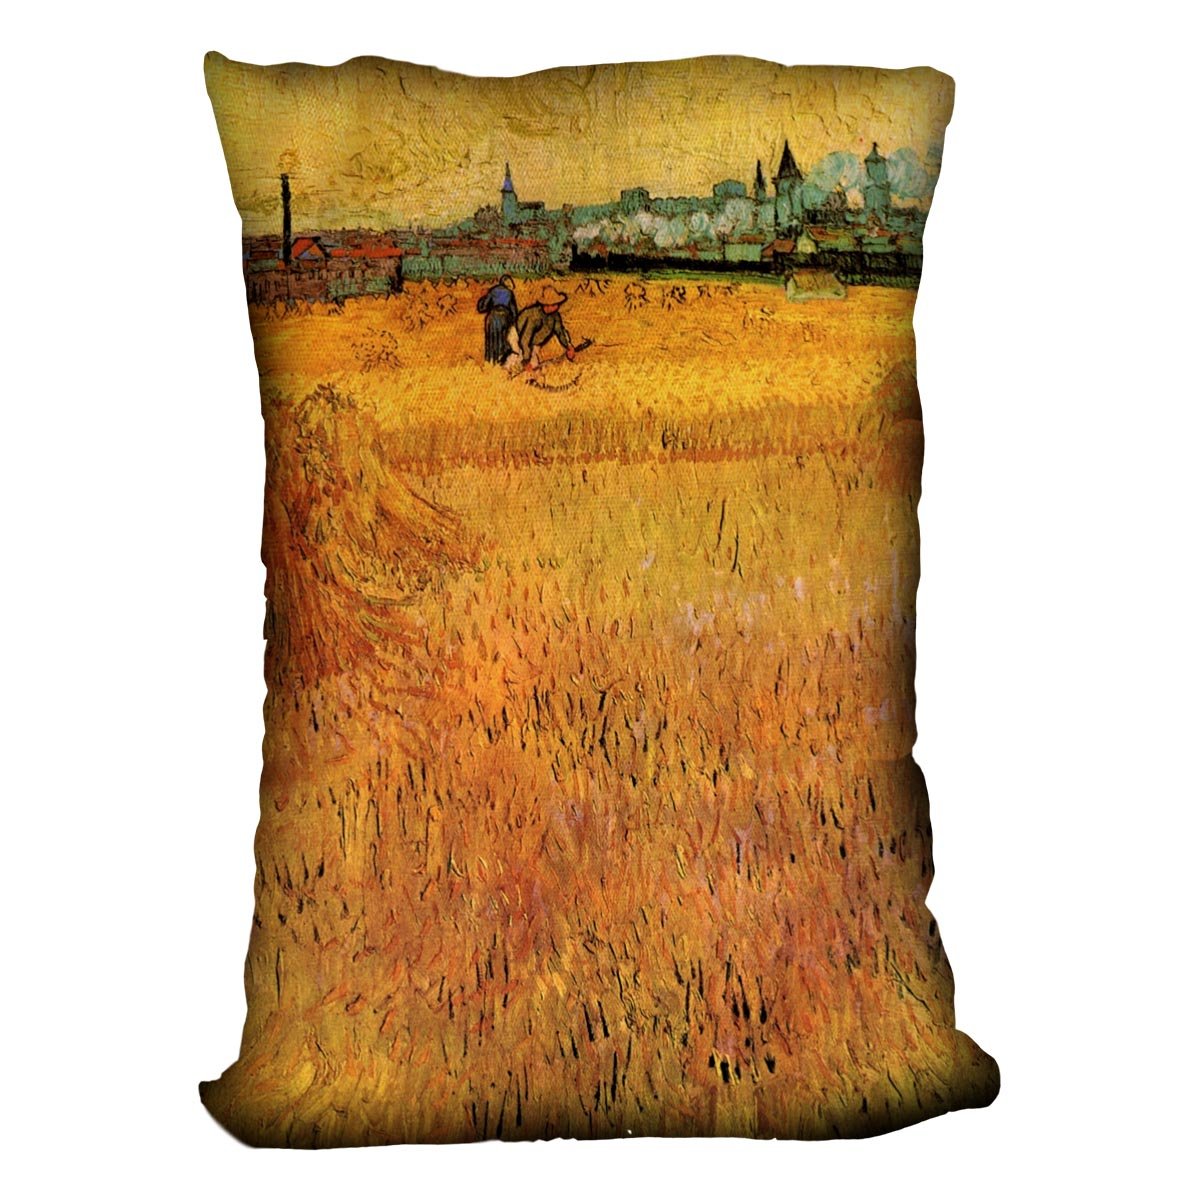 Arles View from the Wheat Fields by Van Gogh Throw Pillow